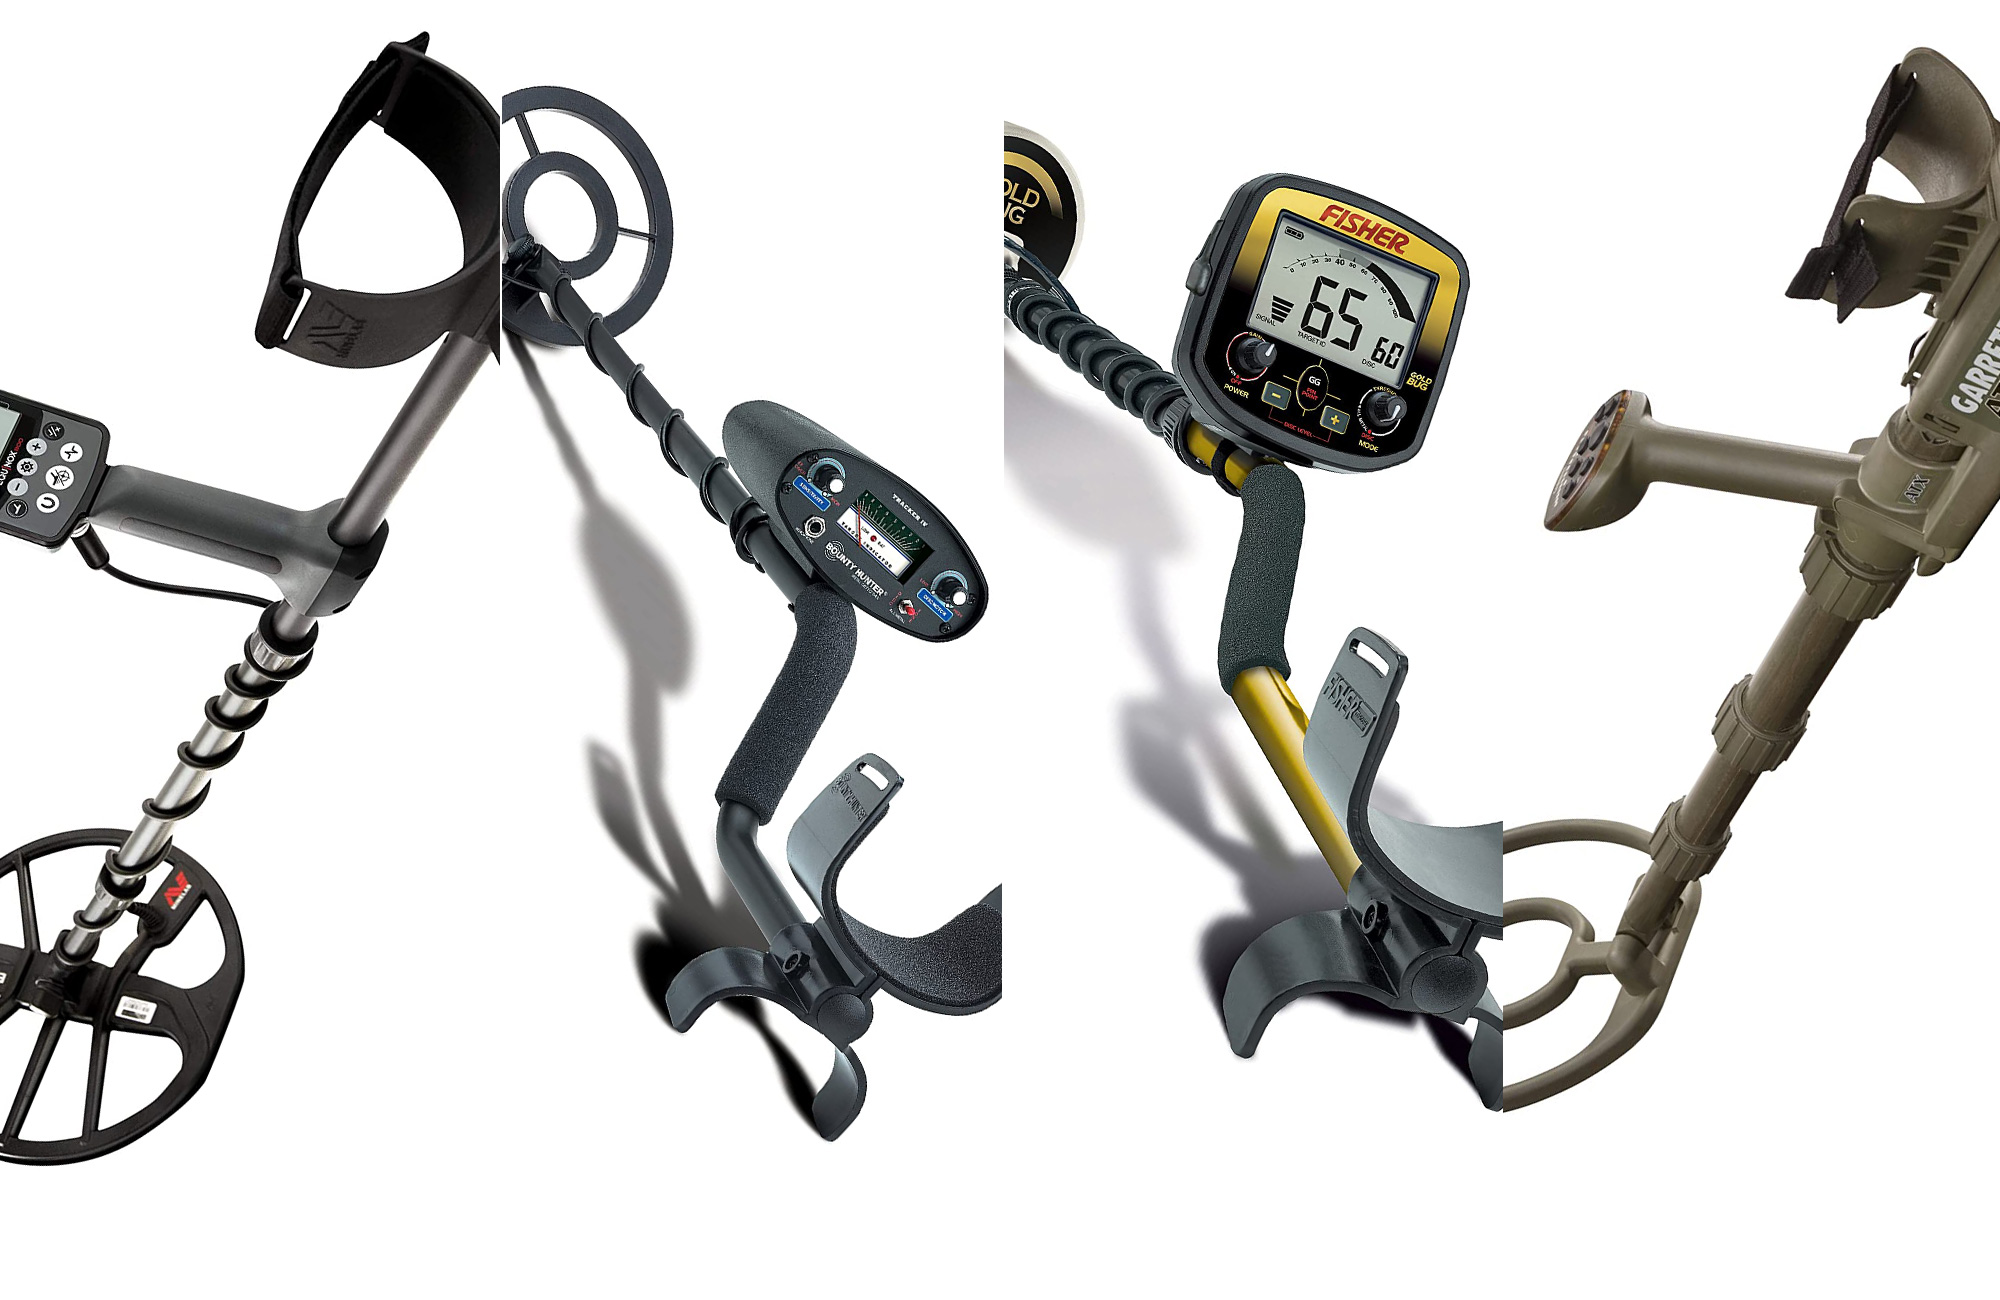 Professional Metal Detecting Equipment For Sale